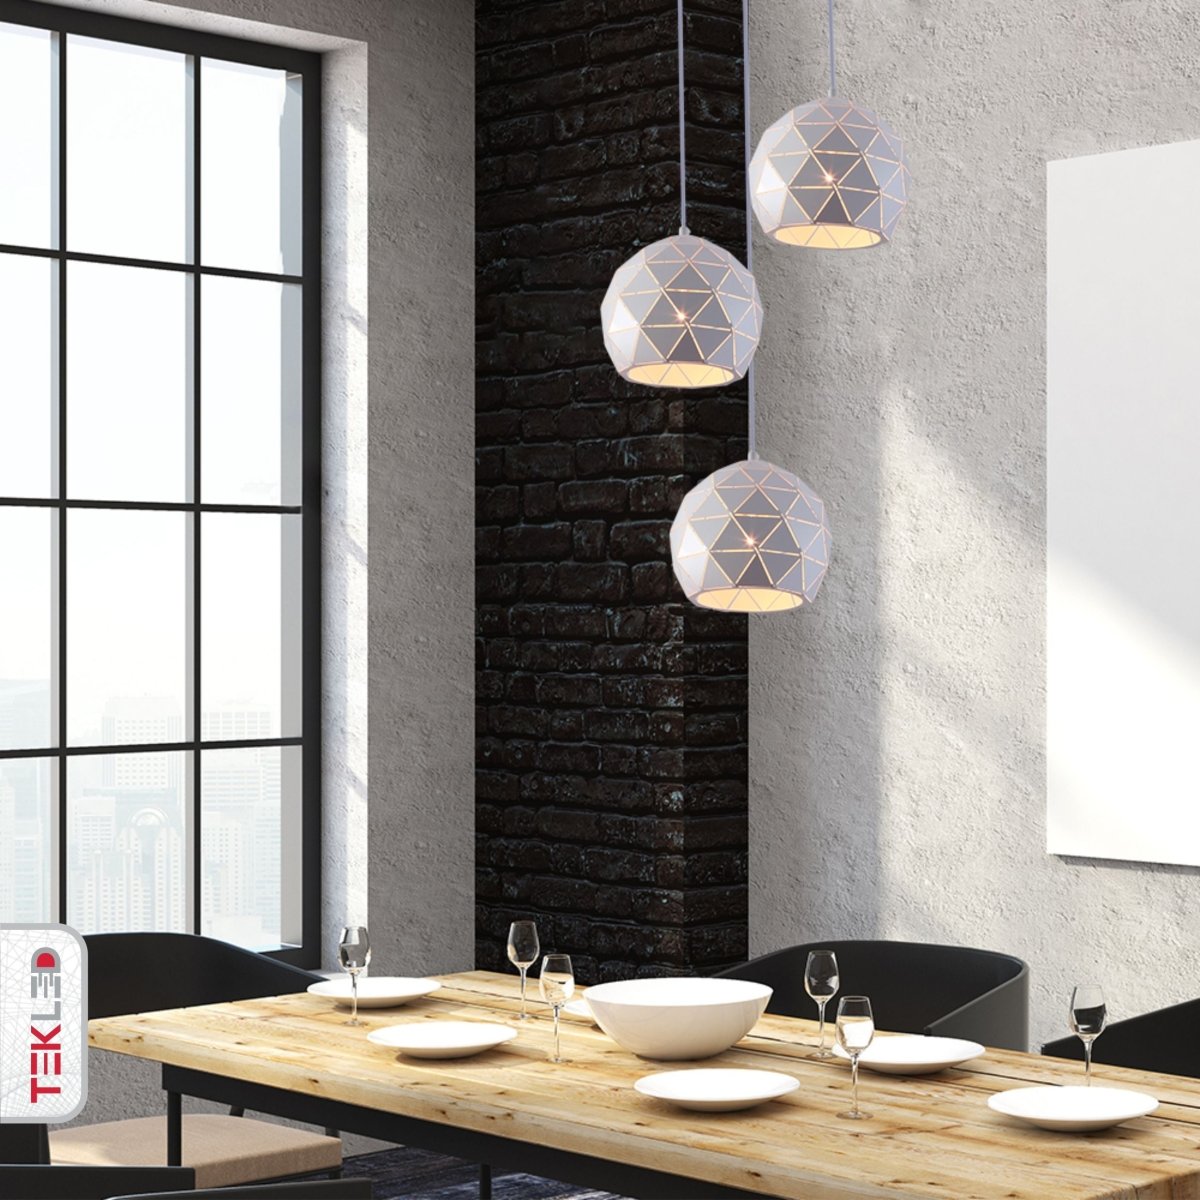 Indoor usage of White Metal Laser Cut Globe Pendant Light with 3xE27 Fitting | TEKLED 150-18258